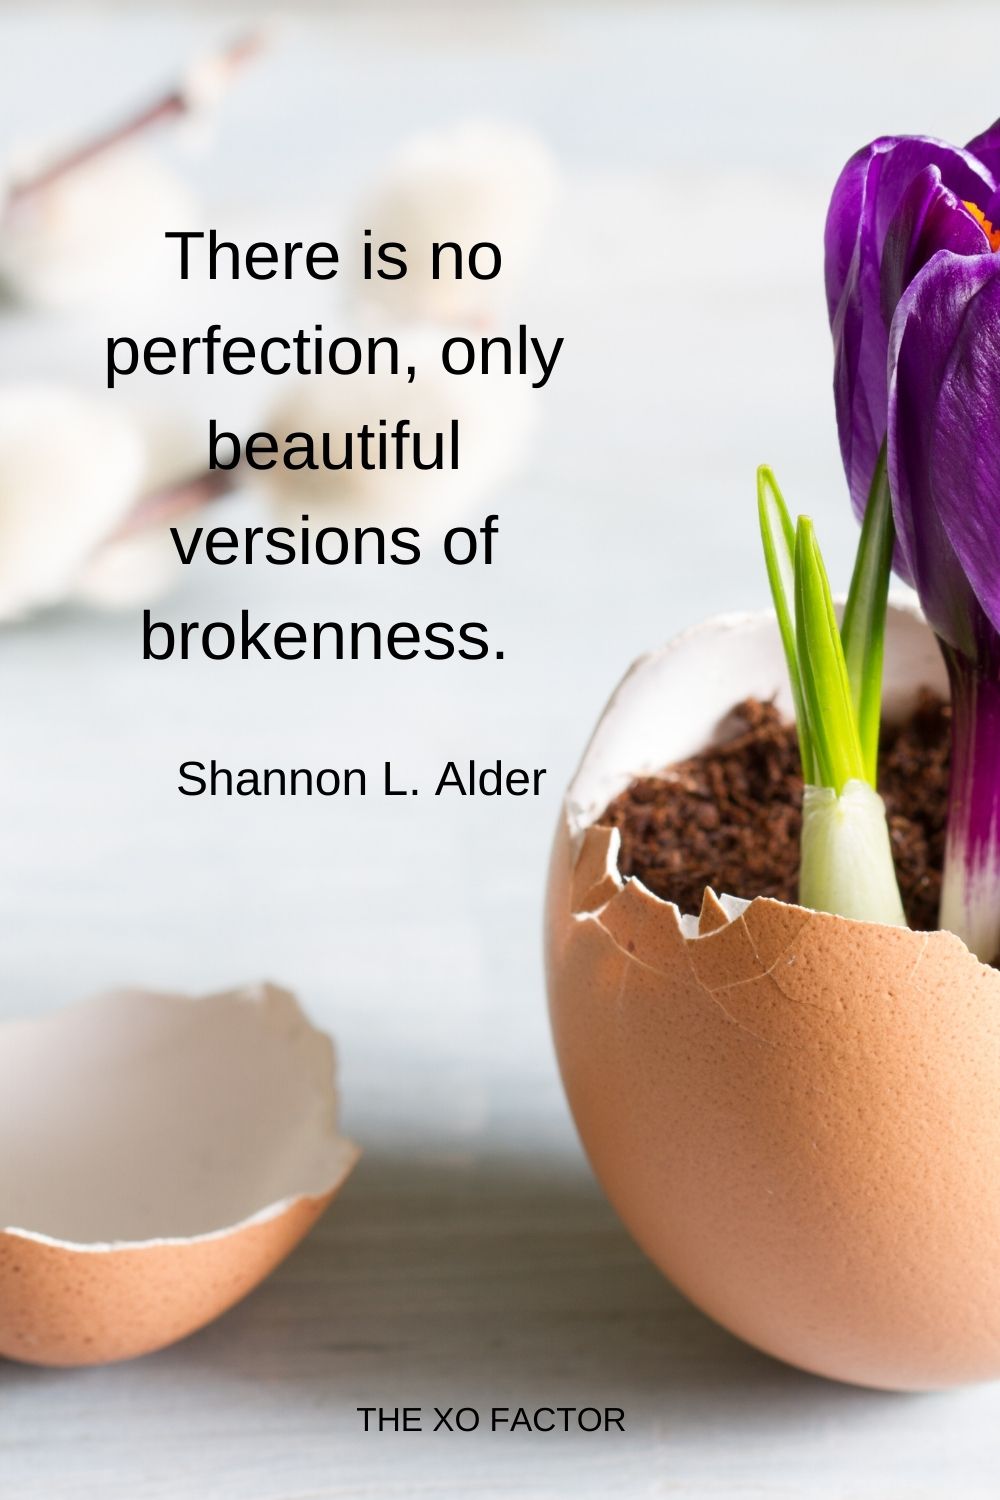 There is no perfection, only beautiful versions of brokenness.  Shannon L. Alder